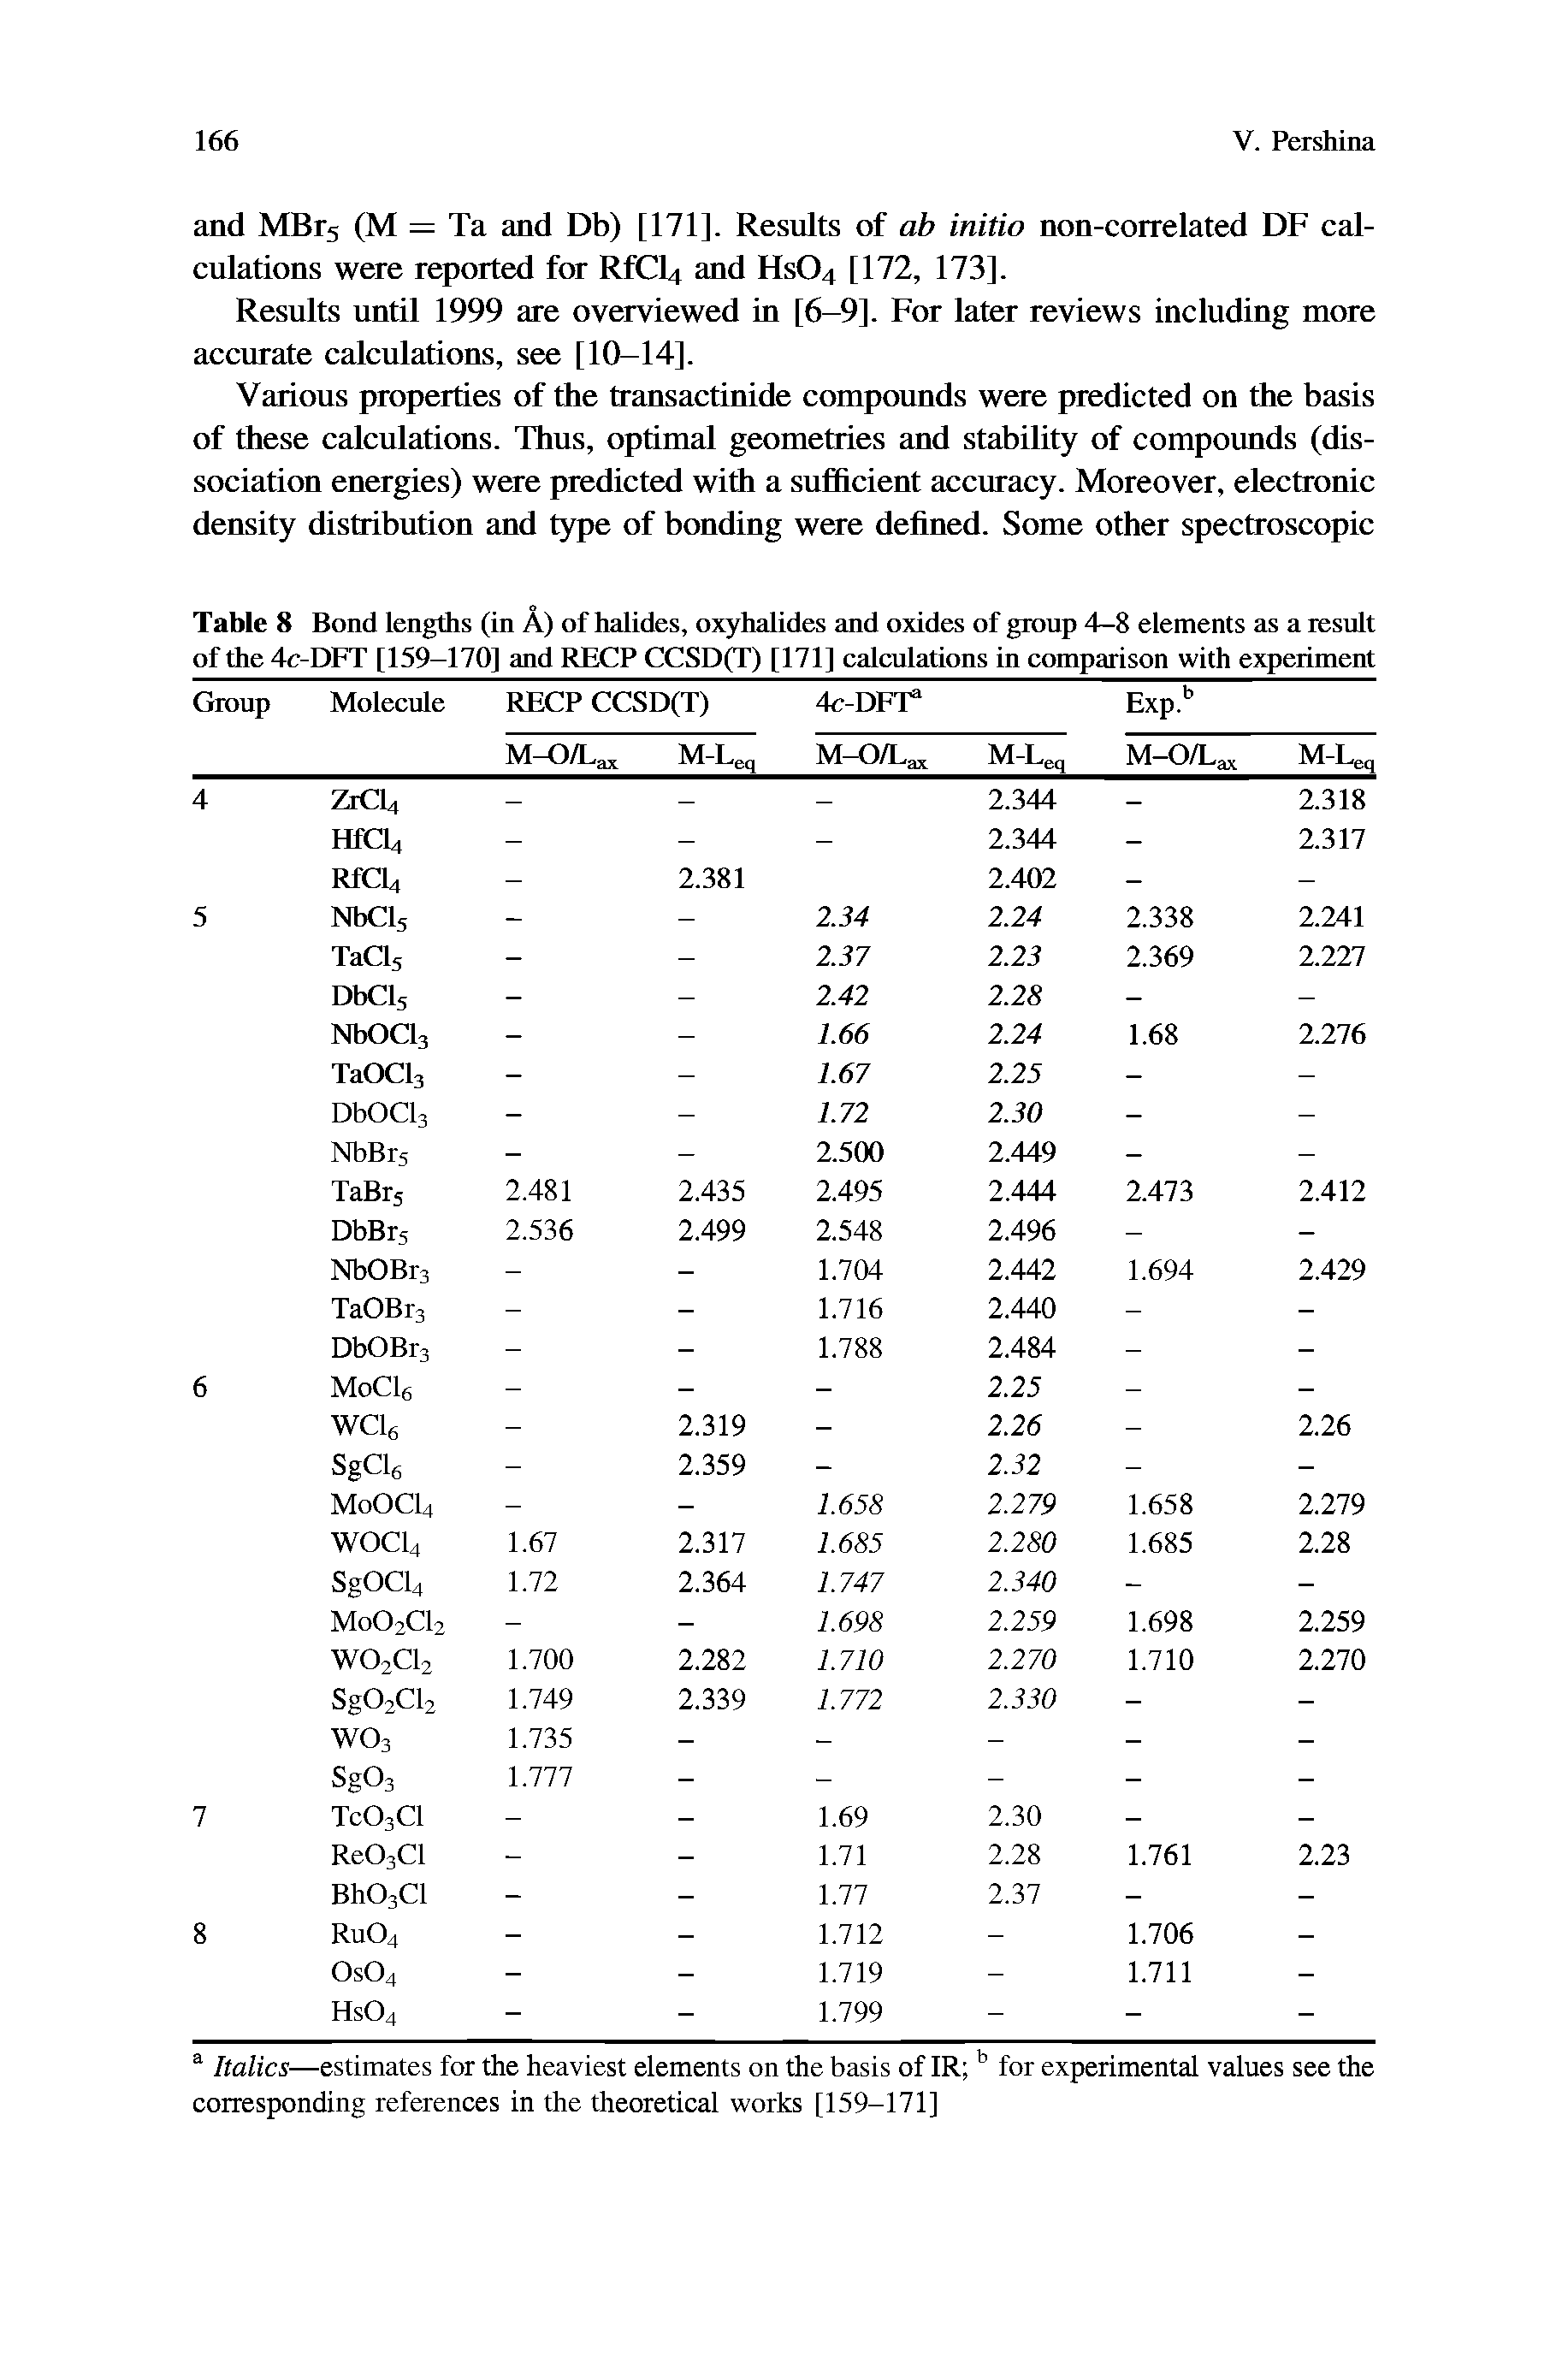 Table 8 Bond lengths (in A) of halides, oxyhalides and oxides of group 4—8 elements as a result of the 4c-DFT [159-170] and RECP CCSD(T) [171] calculations in comparison with experiment...